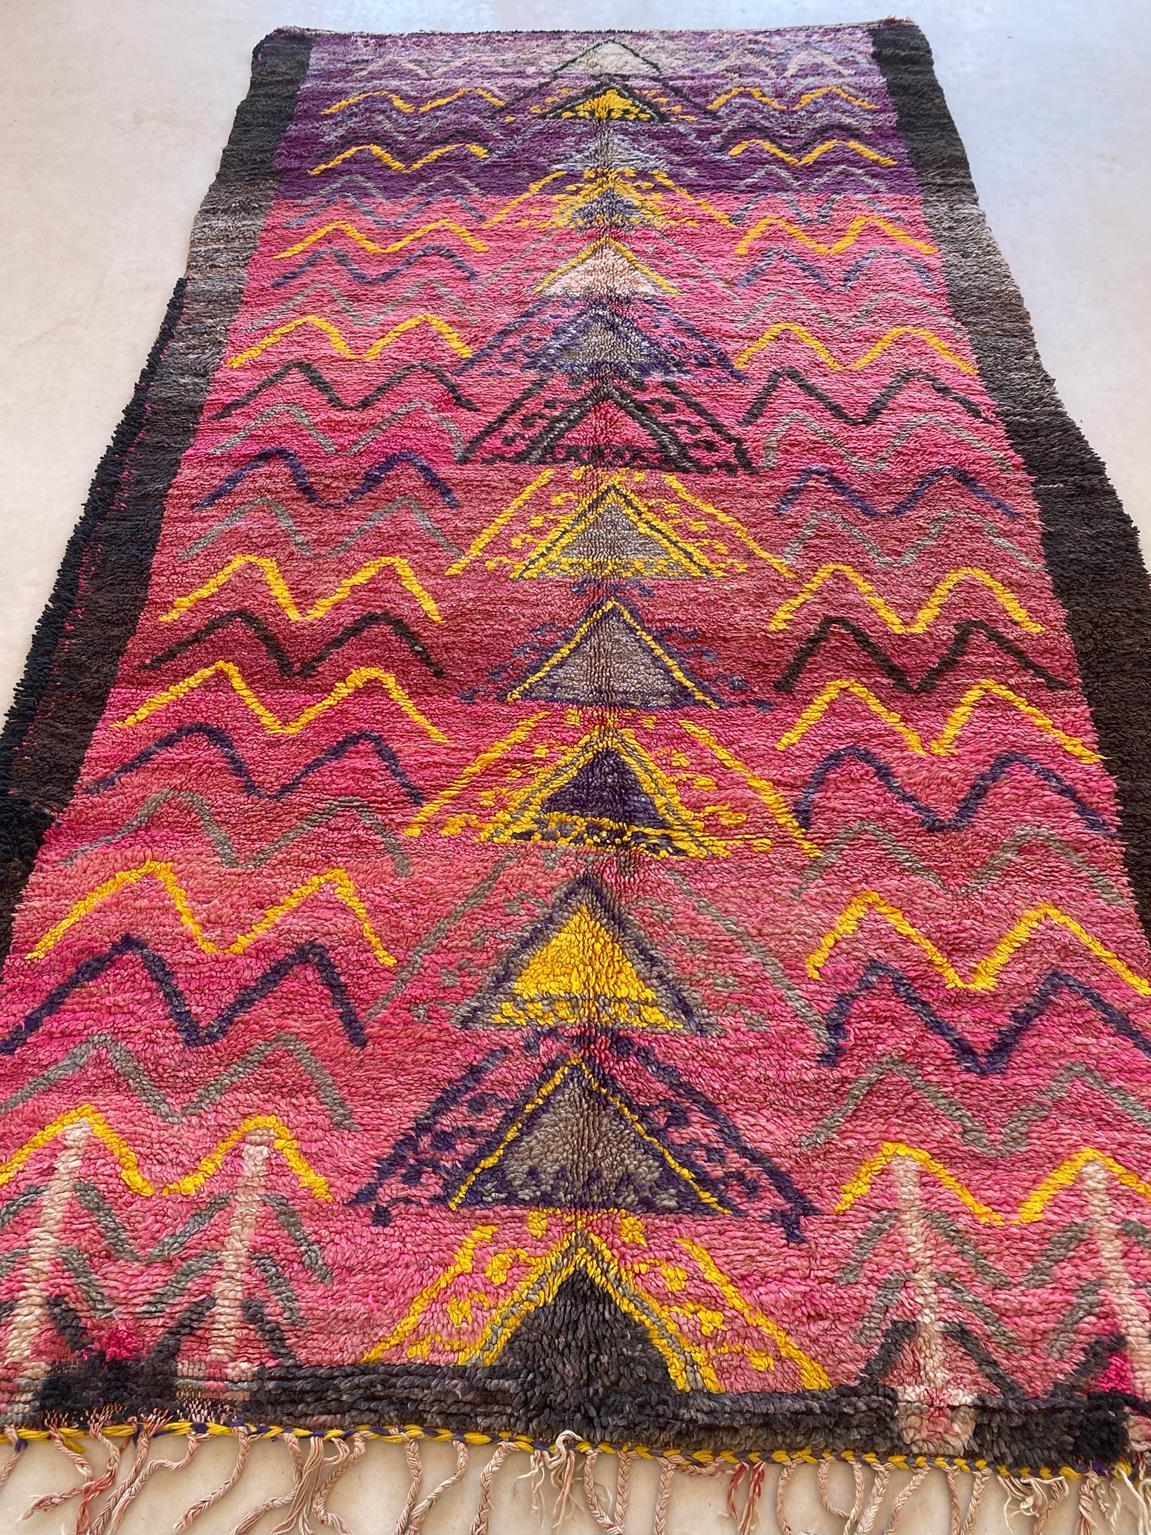 Vintage Moroccan Boujad rug - Pink/purple/yellow - 6.8x12.7feet / 207x387cm In Good Condition For Sale In Marrakech, MA